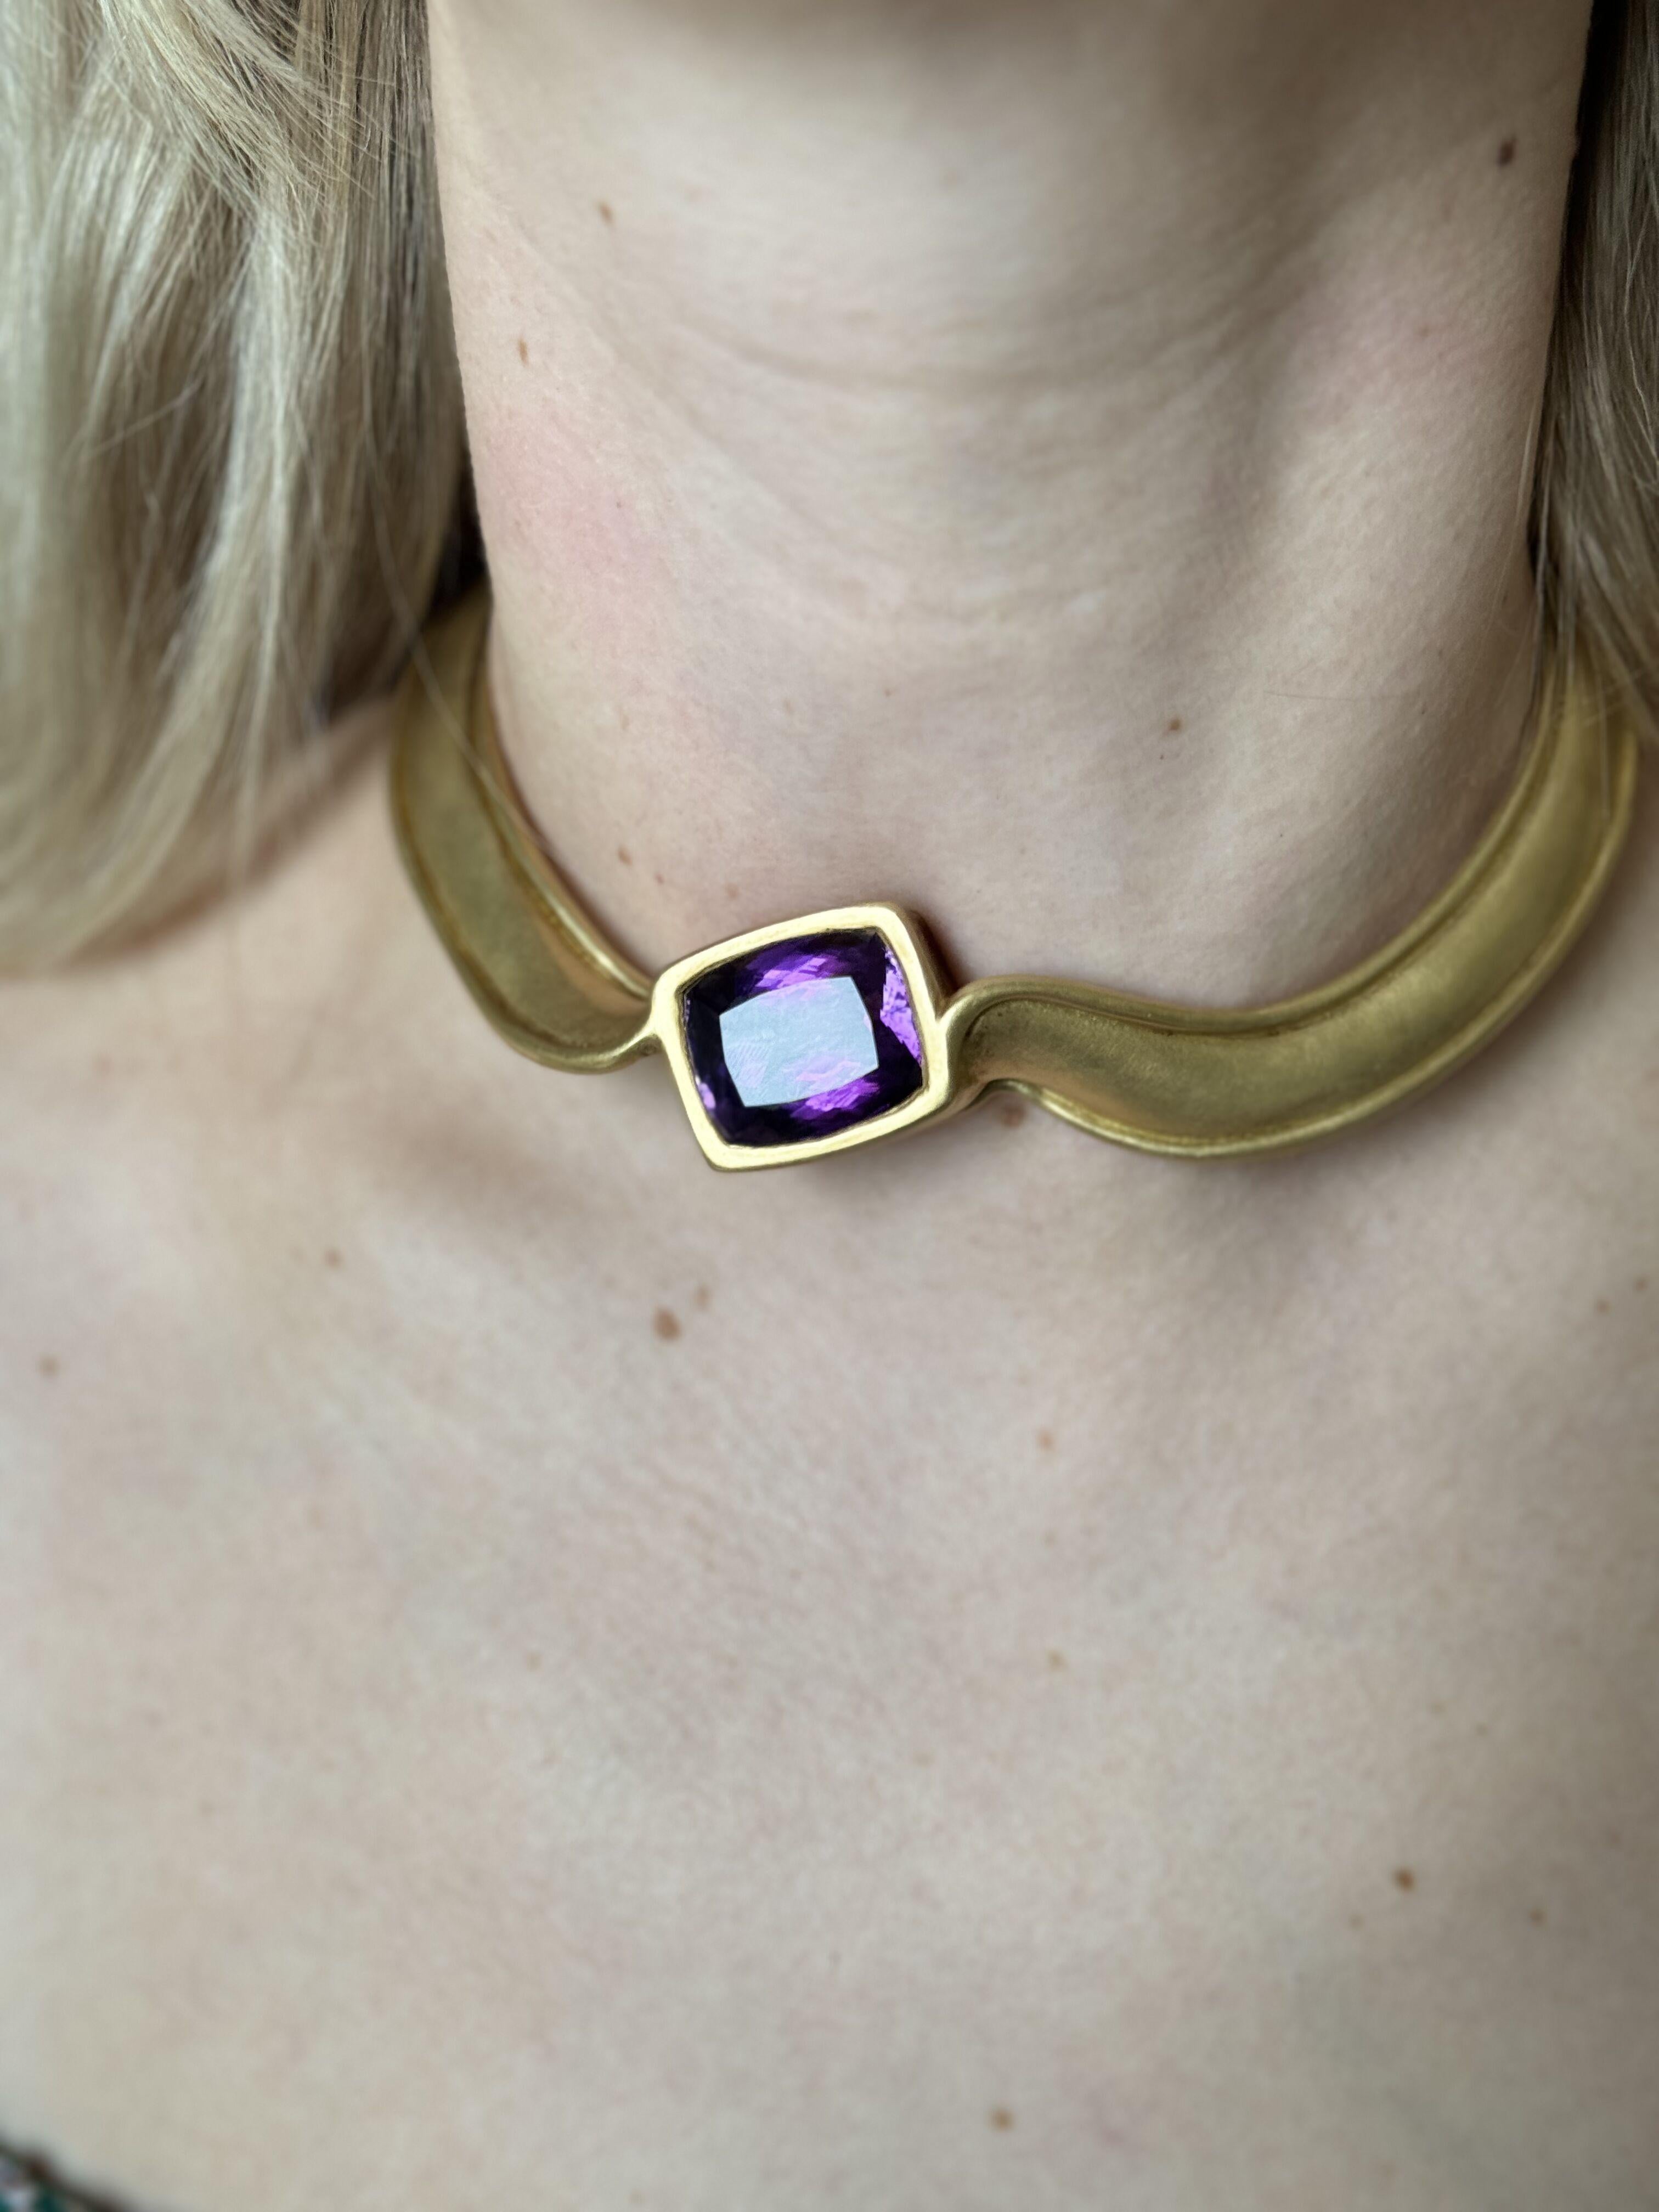 Impressive and rare Tiffany & Co collar necklace in 18k yellow gold, with center 47ct amethyst (Stone measures approx. 23.3 x 19.6 x 14.7mm). Necklace will fit approximately 13-14